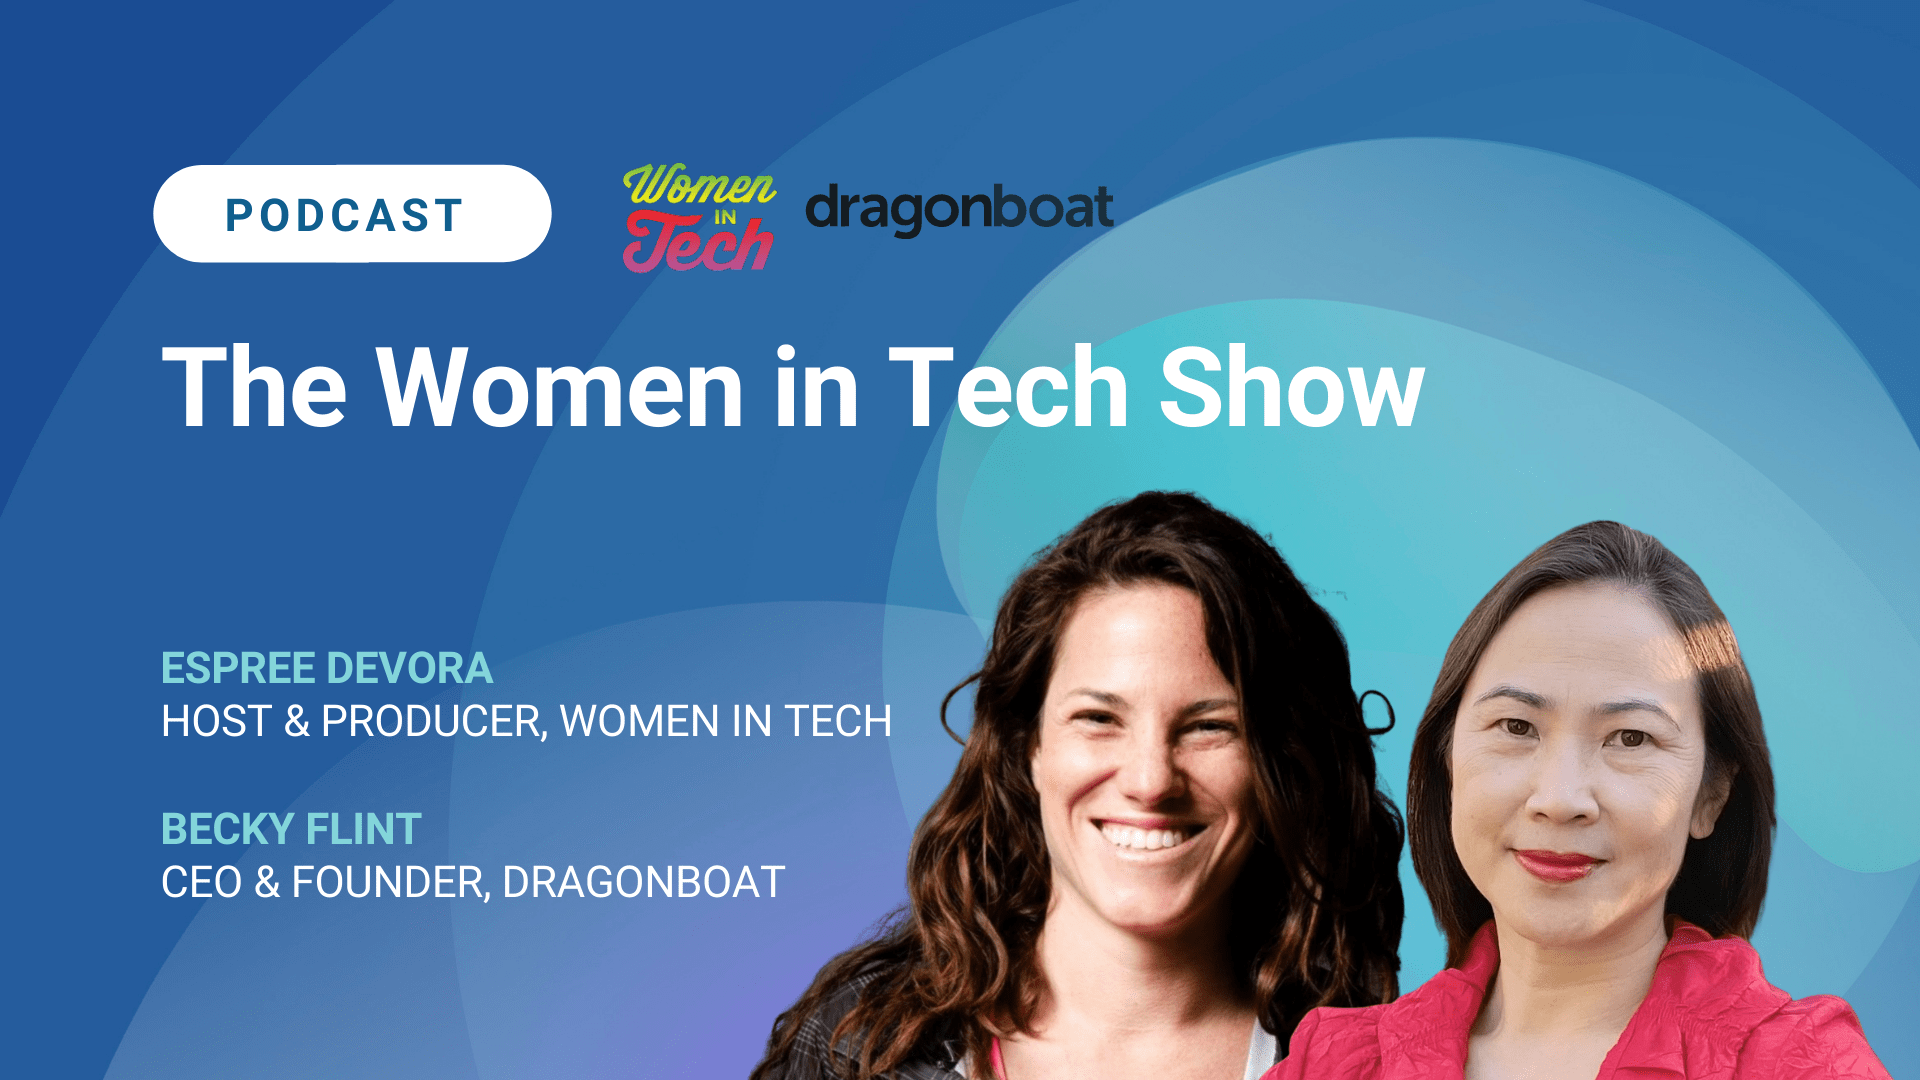 Women in Tech Podcast: A Behind-the-Scenes Look at Dragonboat